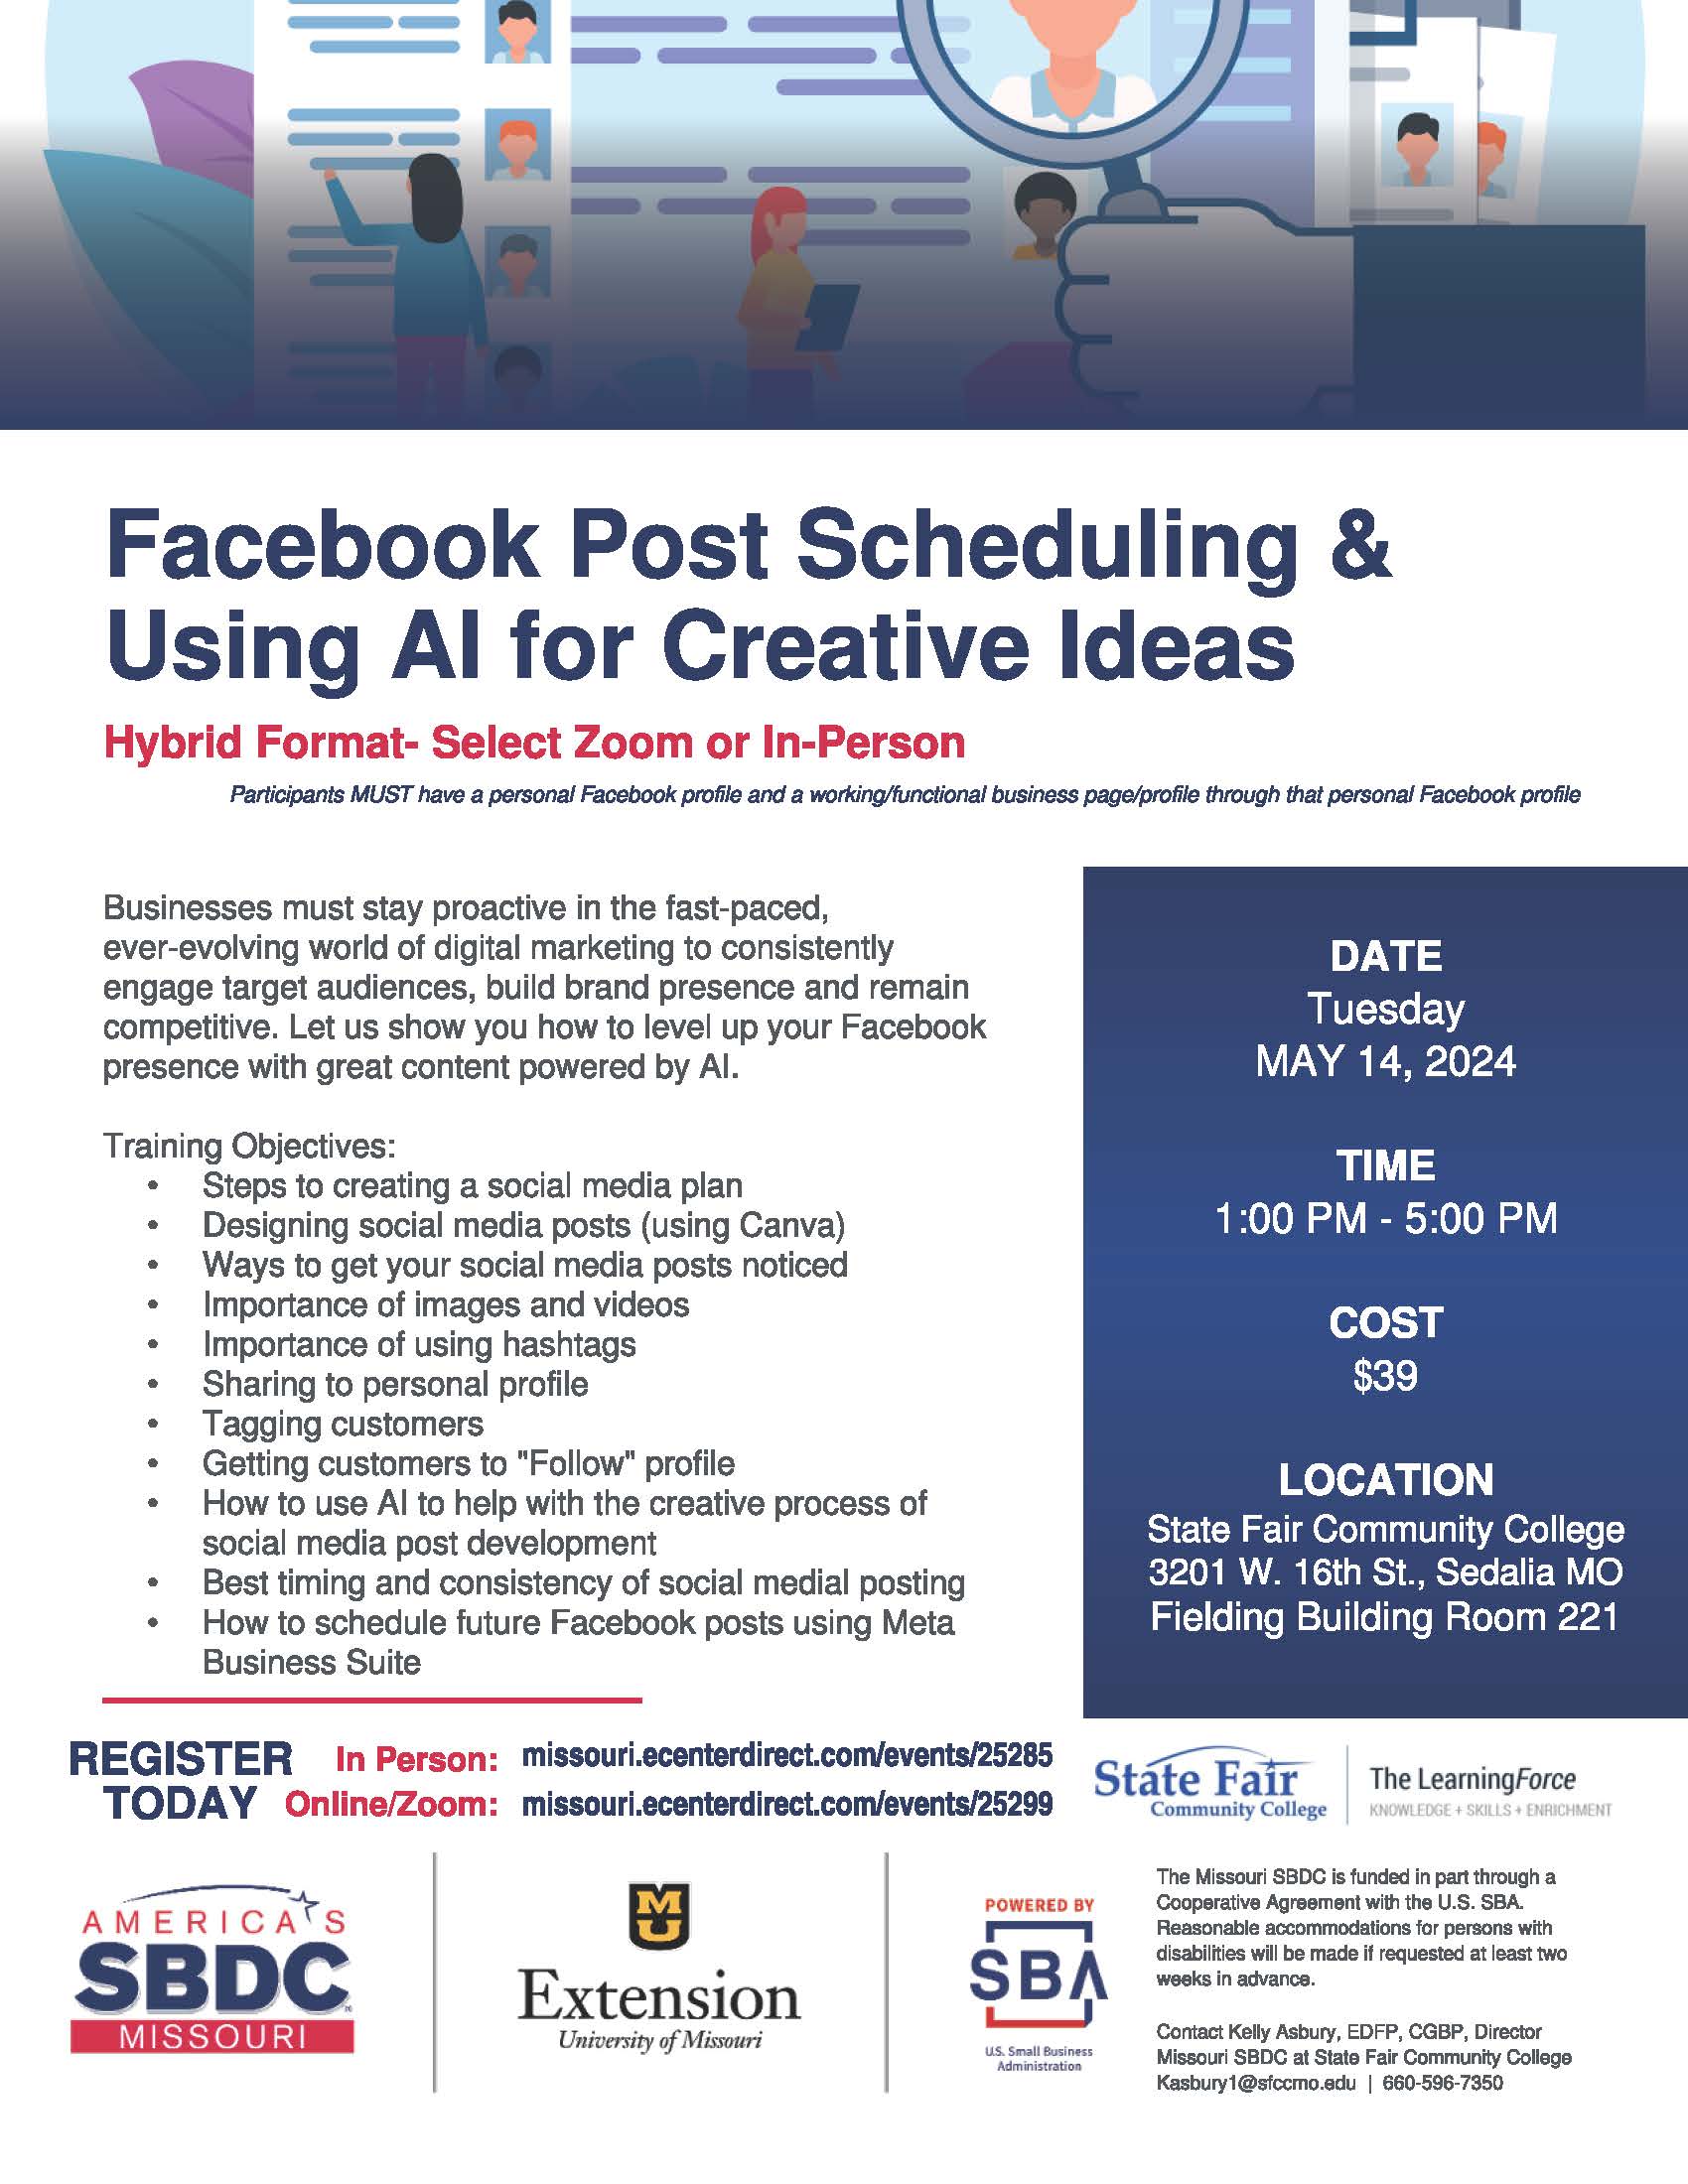 Read more about Missouri SBDC and The LearningForce to host social media and AI Workshop